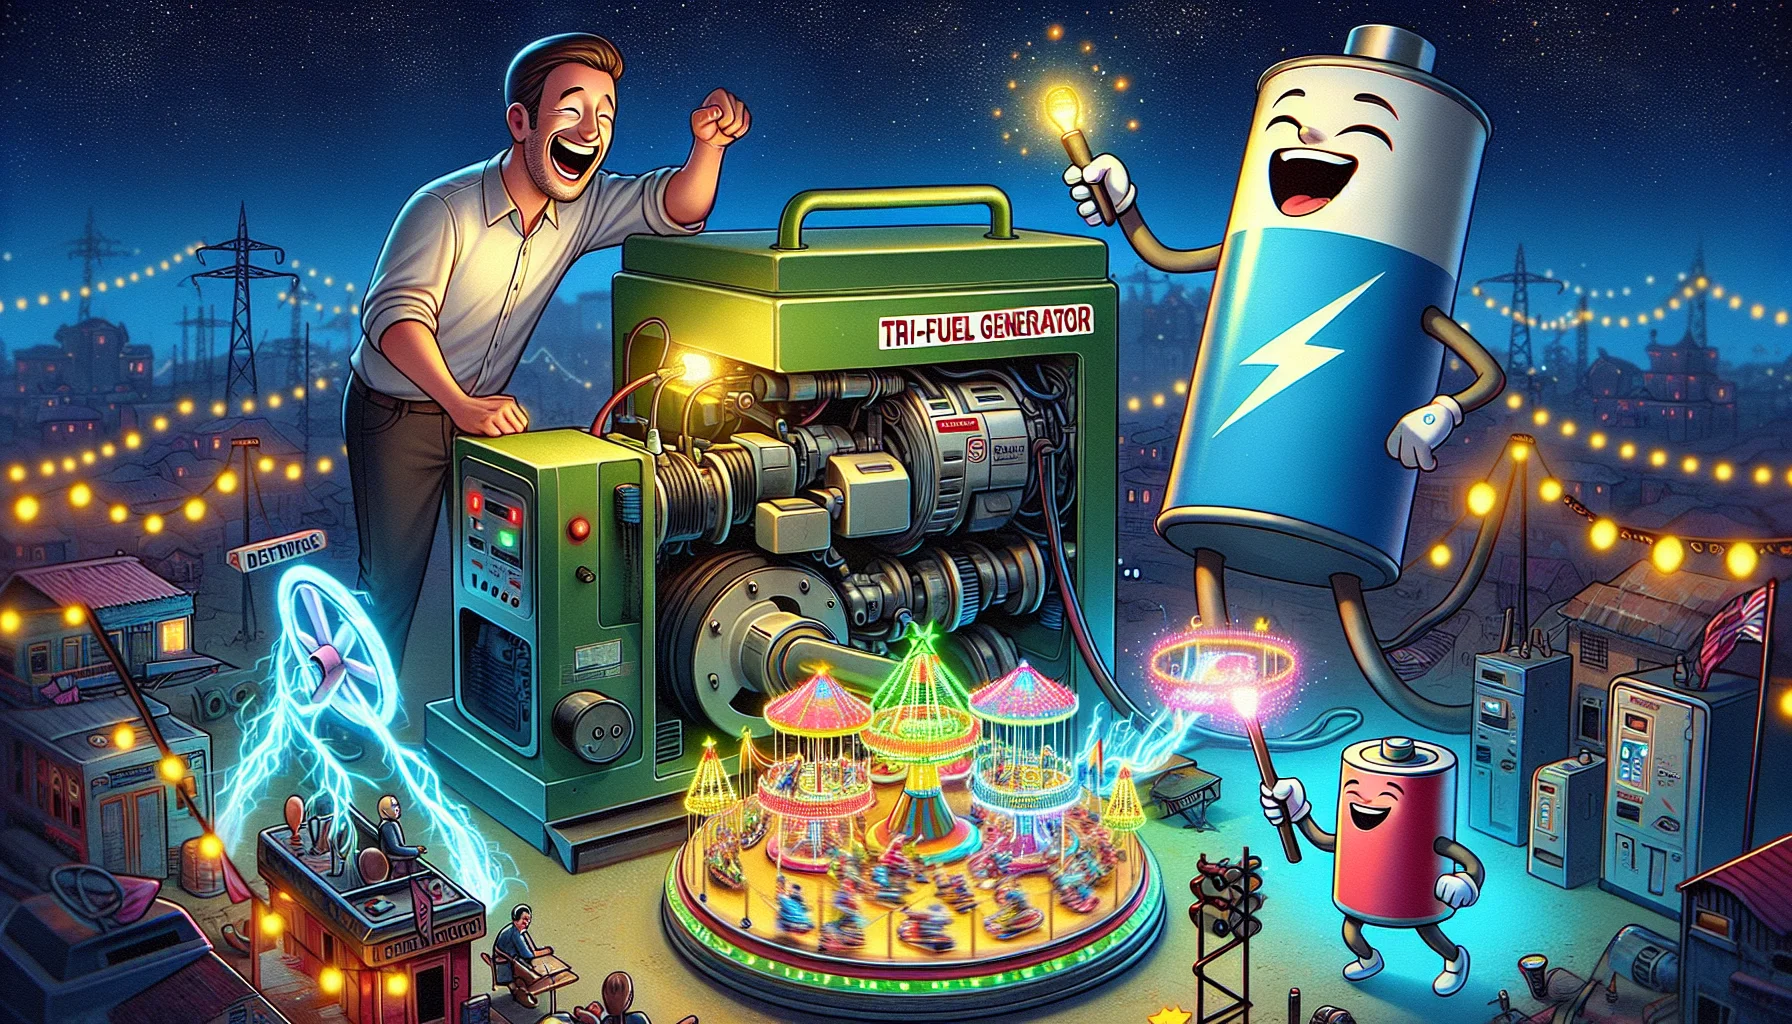 Imagine a humorous scene centered around Tri-Fuel Generators. Picture a Caucasian male and a South Asian female, both electrical engineers, laughing as they power a miniature amusement park full of tiny, vibrant, and fast-spinning rides directly from a Tri-Fuel Generator. Neon lights illuminate their faces, highlighting their amusement and surprise. The backdrop is the night sky, dotted with stars, framing this unique usage of electricity generation. A cartoonish battery character standing off to the side raises a toast with a cup of electric sparks, adding to the whimsical atmosphere.